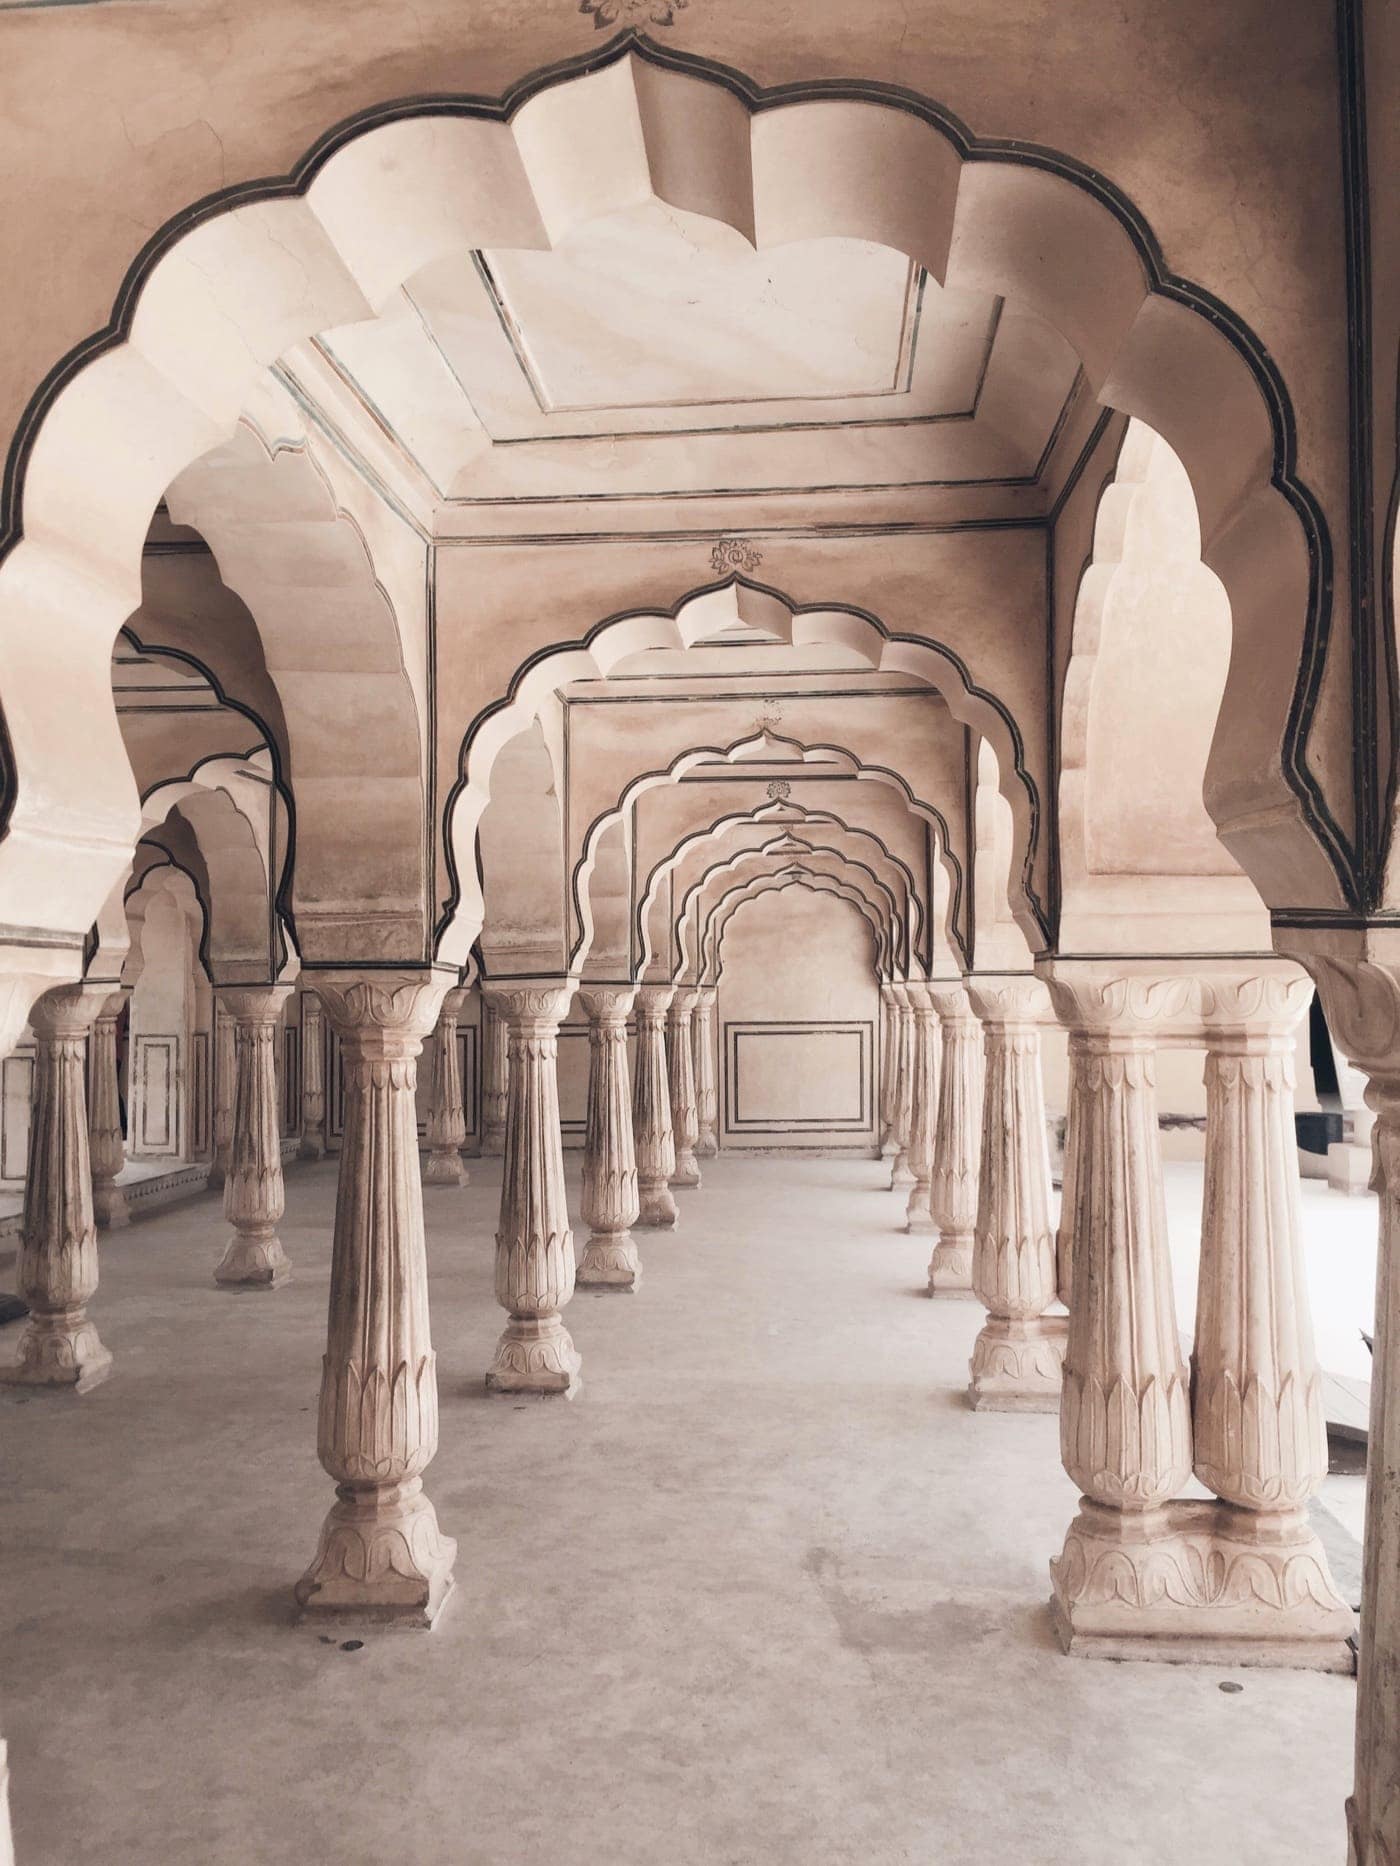 Amer Fort - The Epitome of Rajasthani Charm